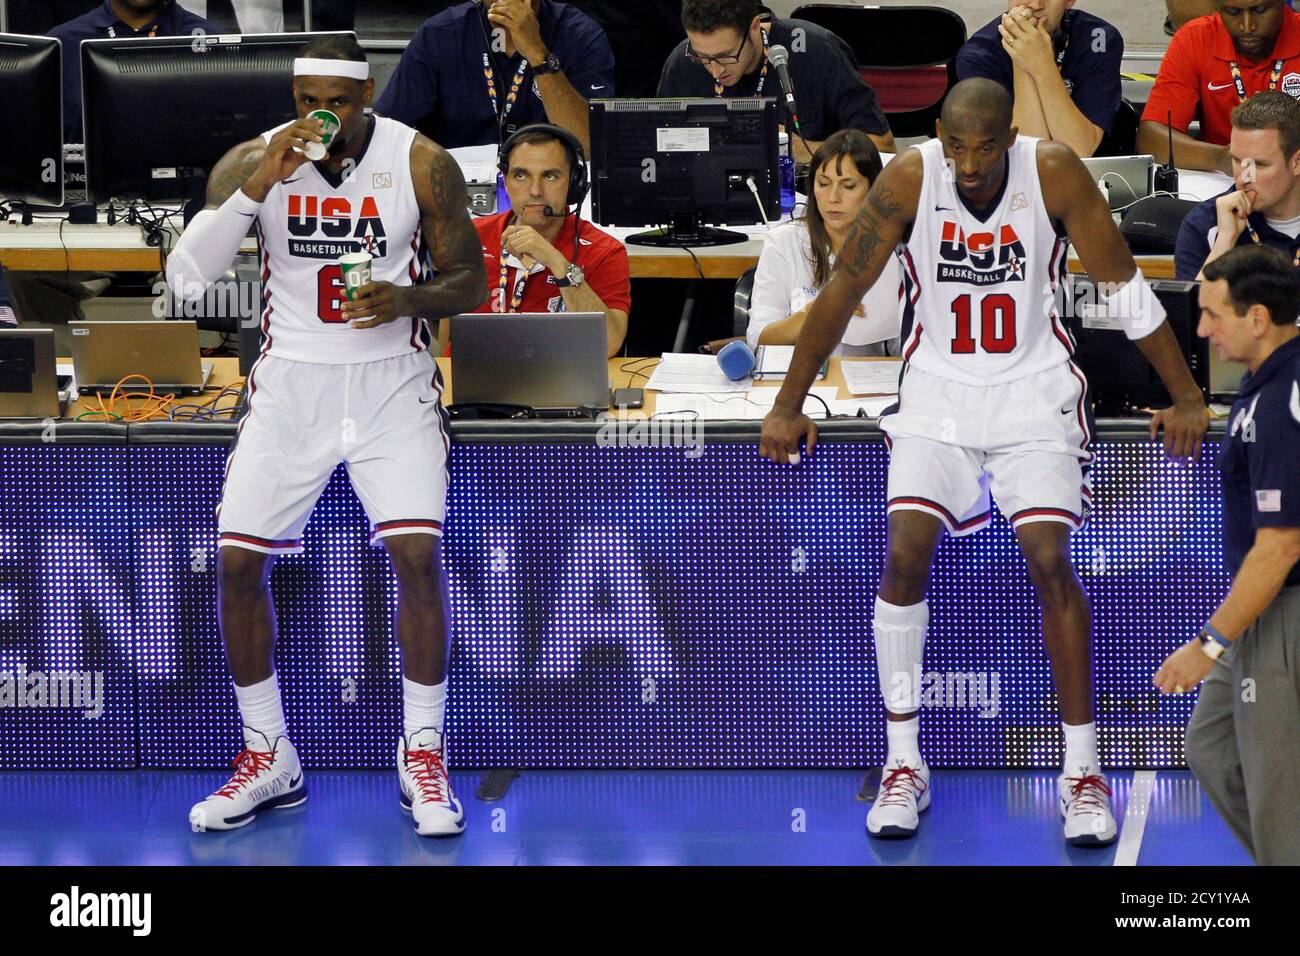 Kobe Bryant R And Lebron James Of Team Usa Look To The Court Against Team Argentina During Their Men S Exhibition Basketball Game Ahead Of The London 12 Olympic Games At Palau Sant